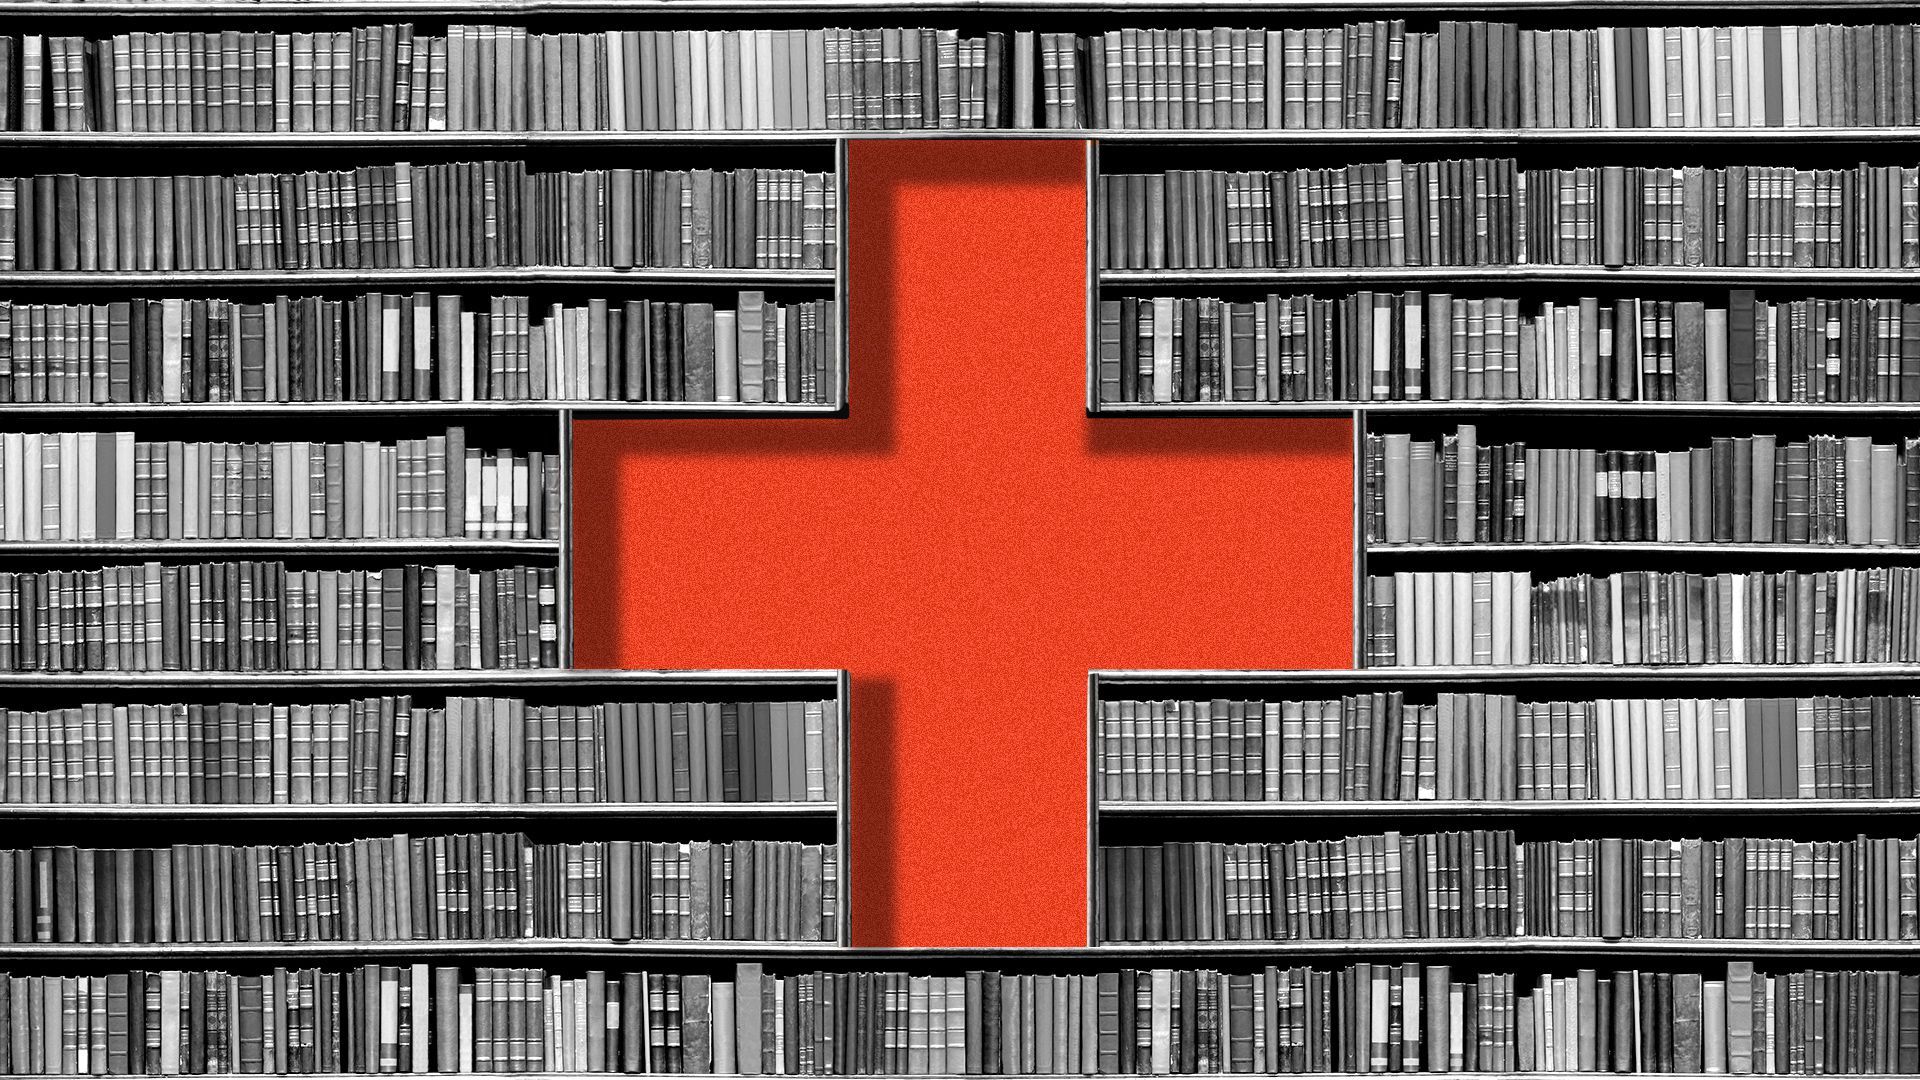 Illustration of a book shelf with a health plus made from negative space.